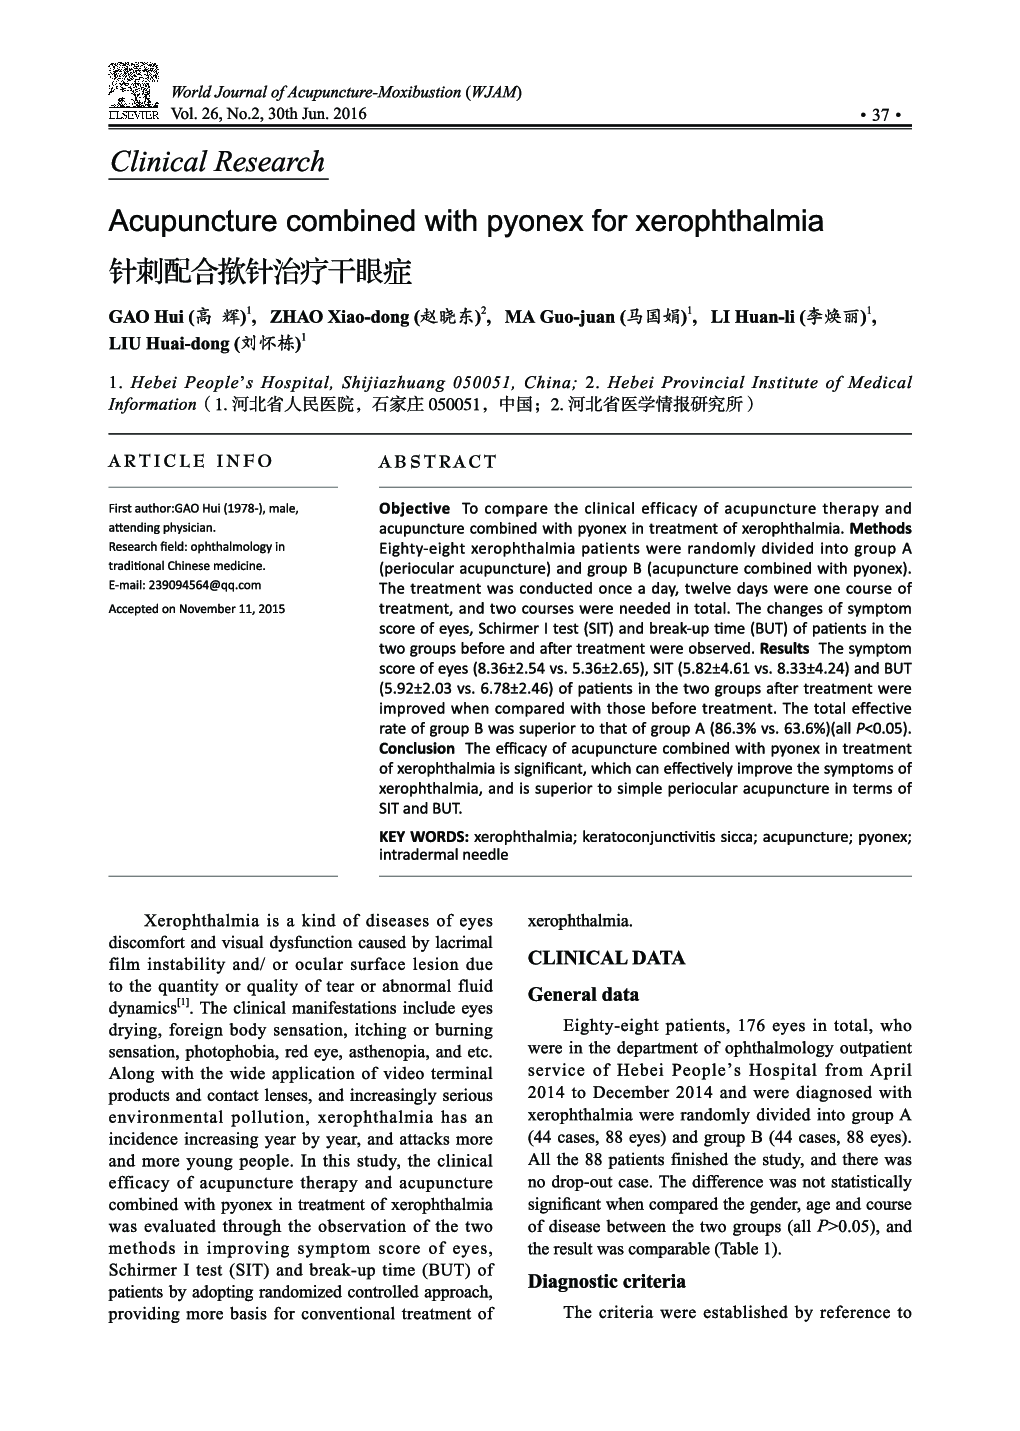 Acupuncture combined with pyonex for xerophthalmia